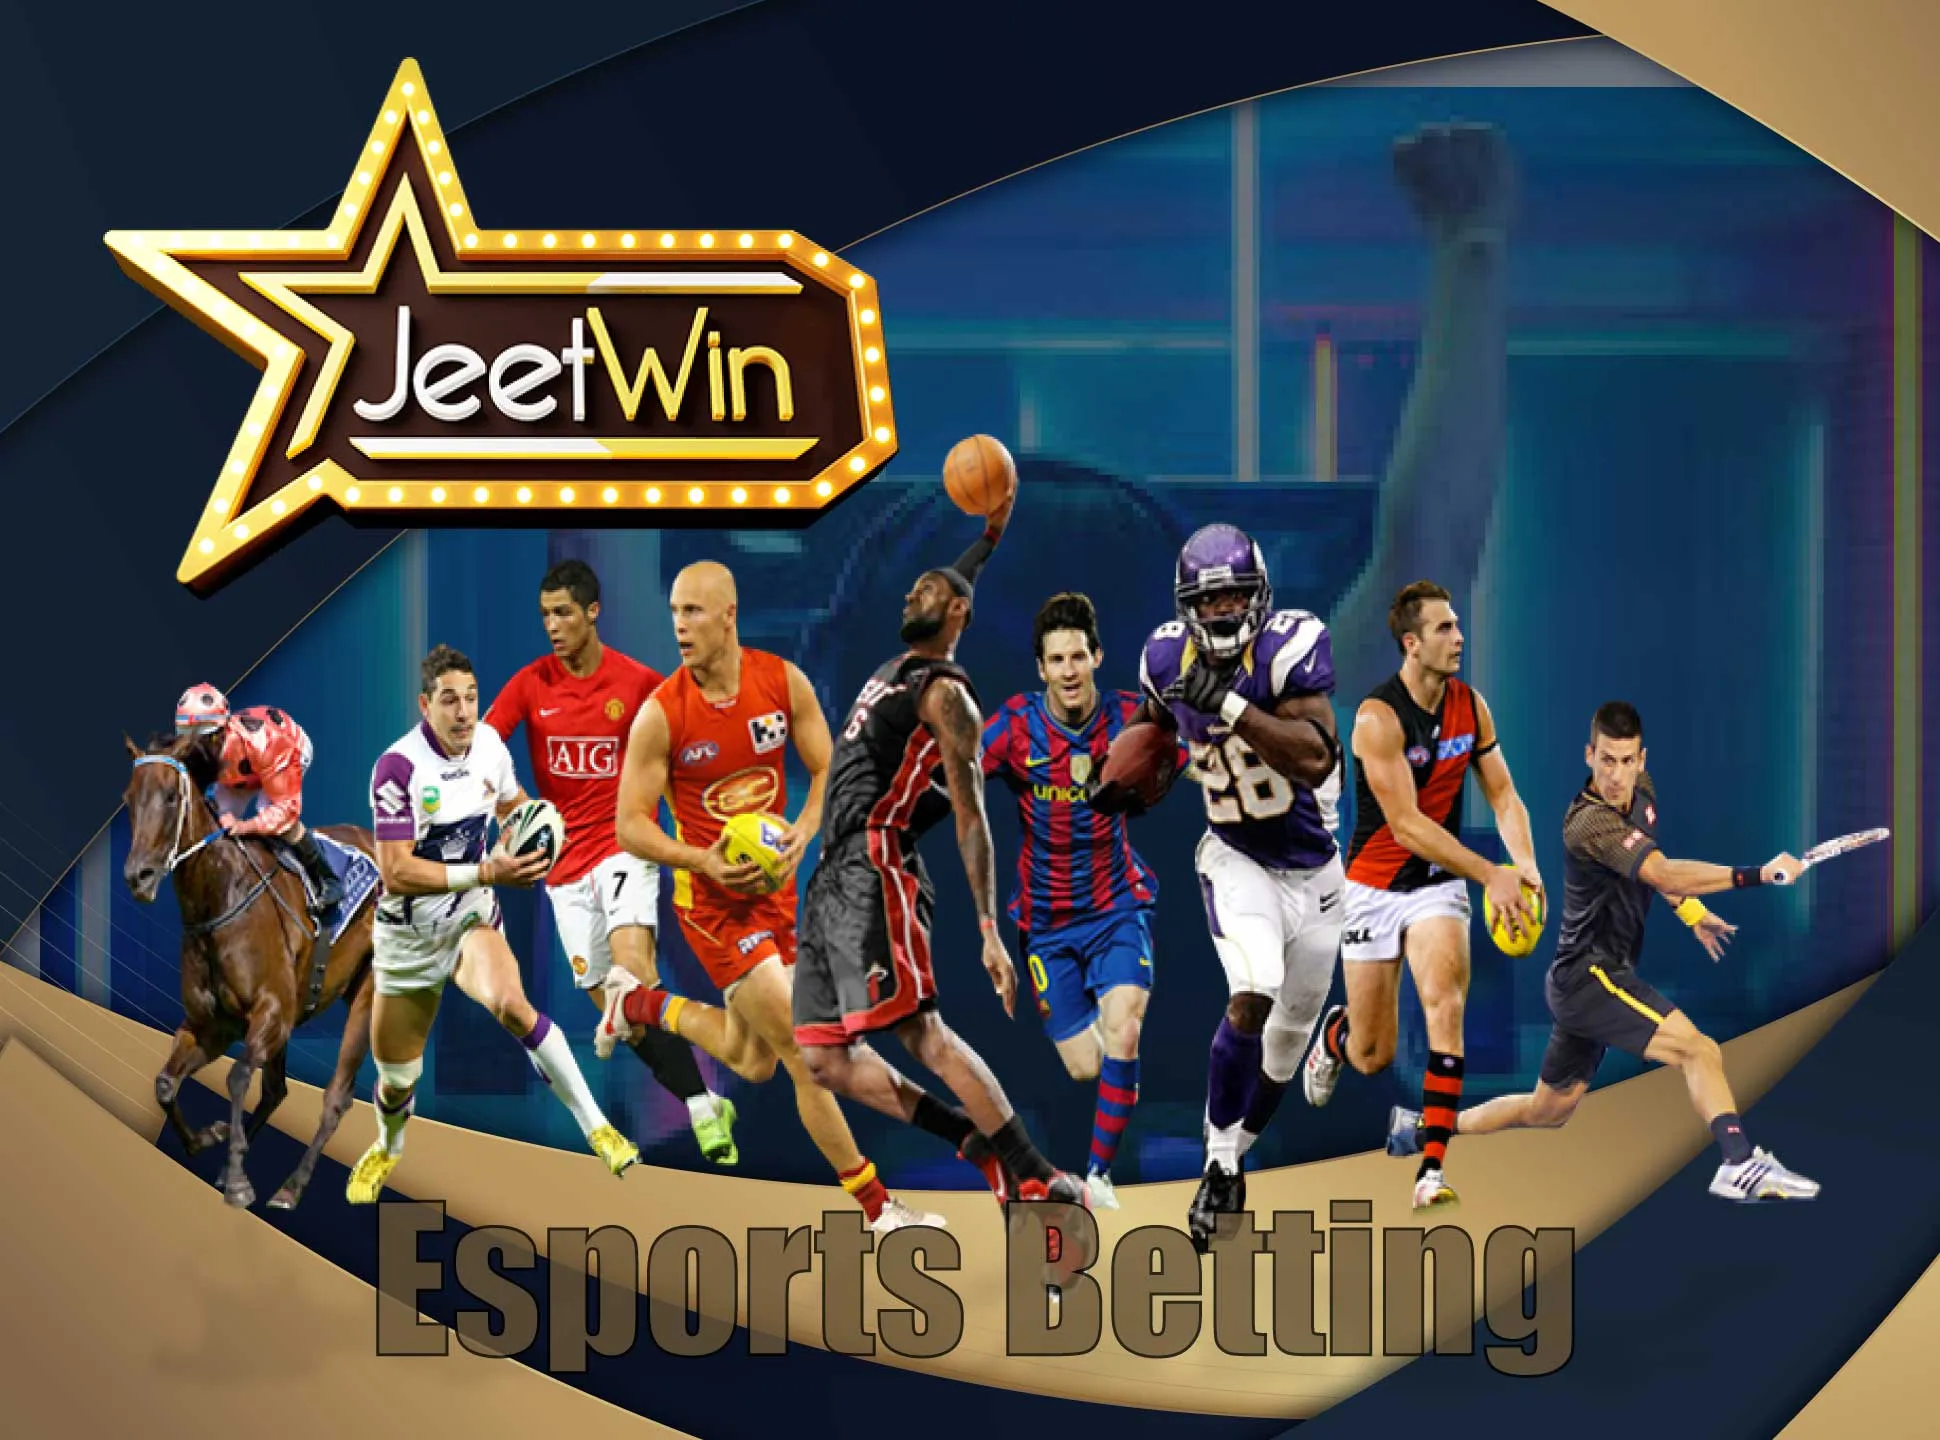 You can also place bets on e-sports in the Jeetwin app.